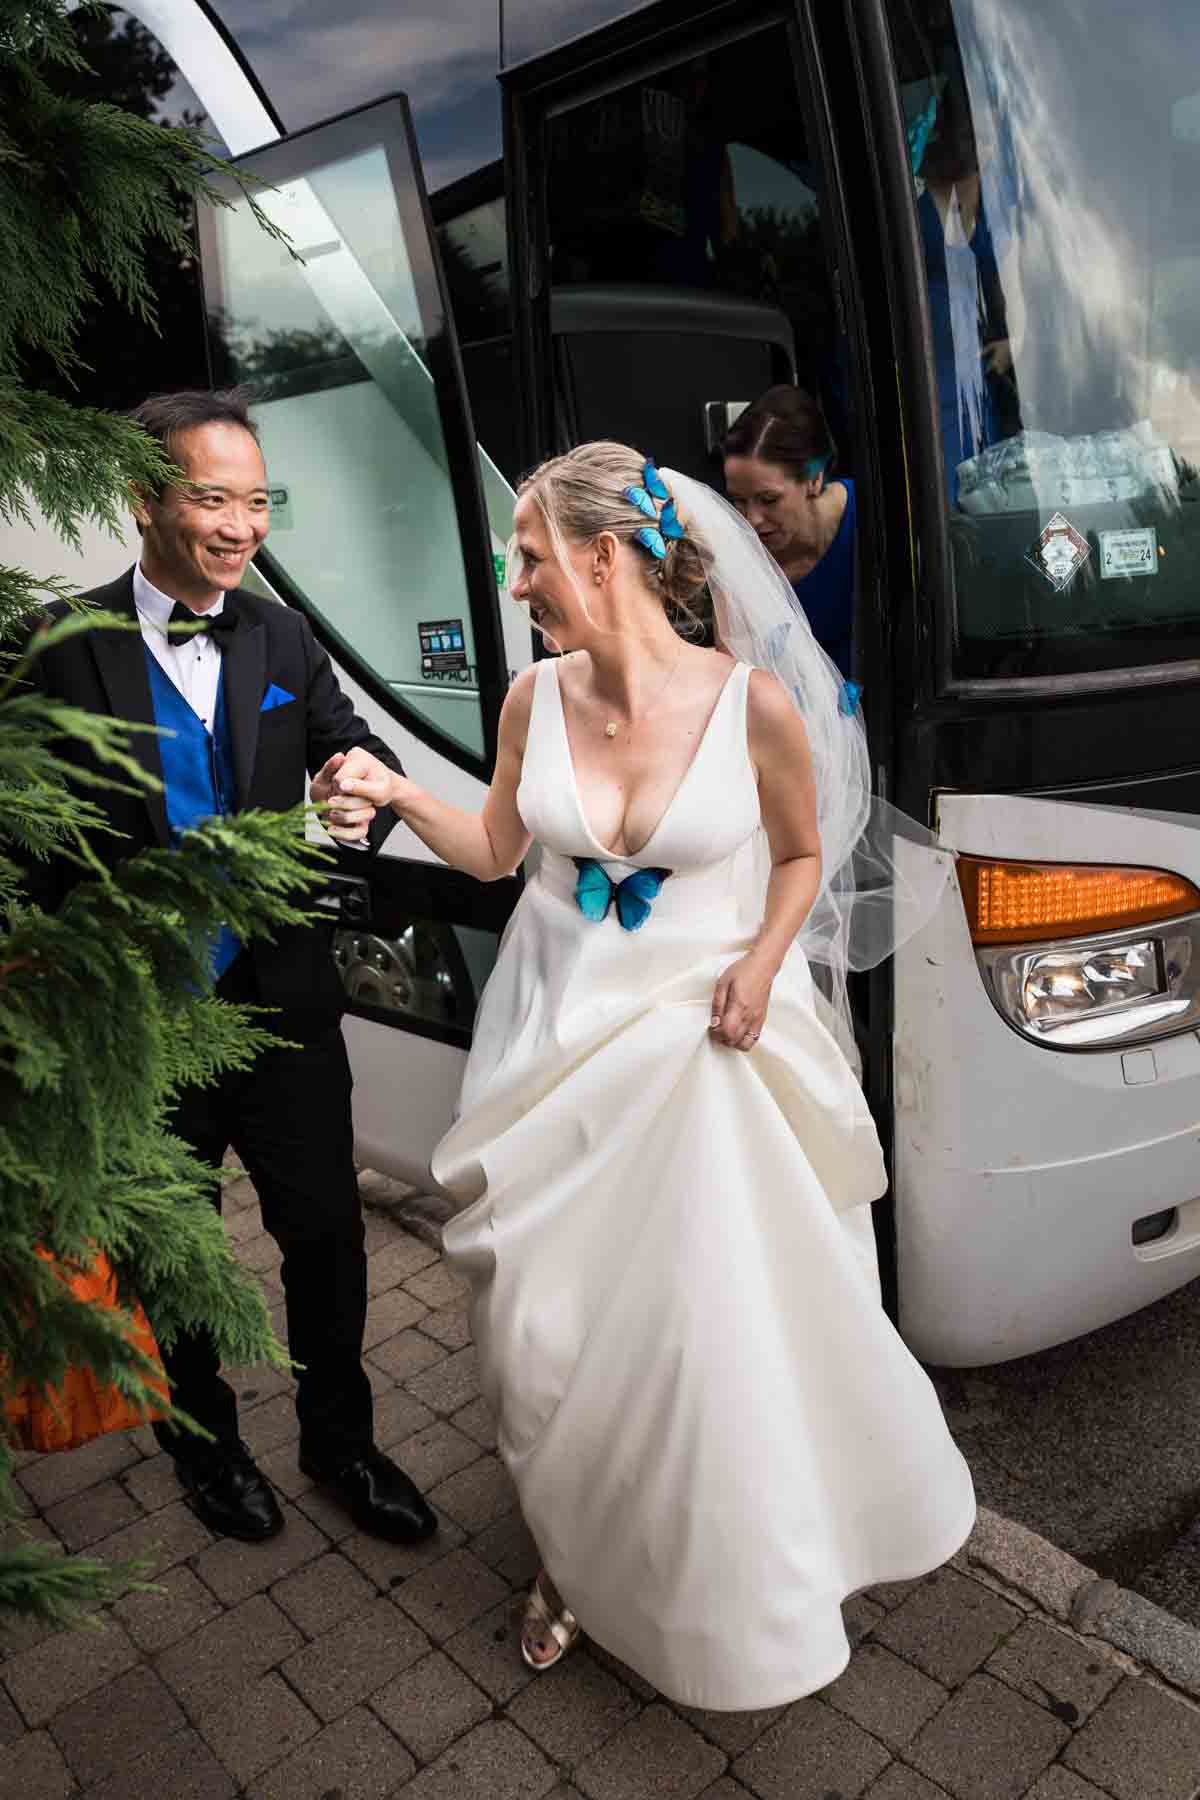 Groom holding bride's hand as she gets out of bus